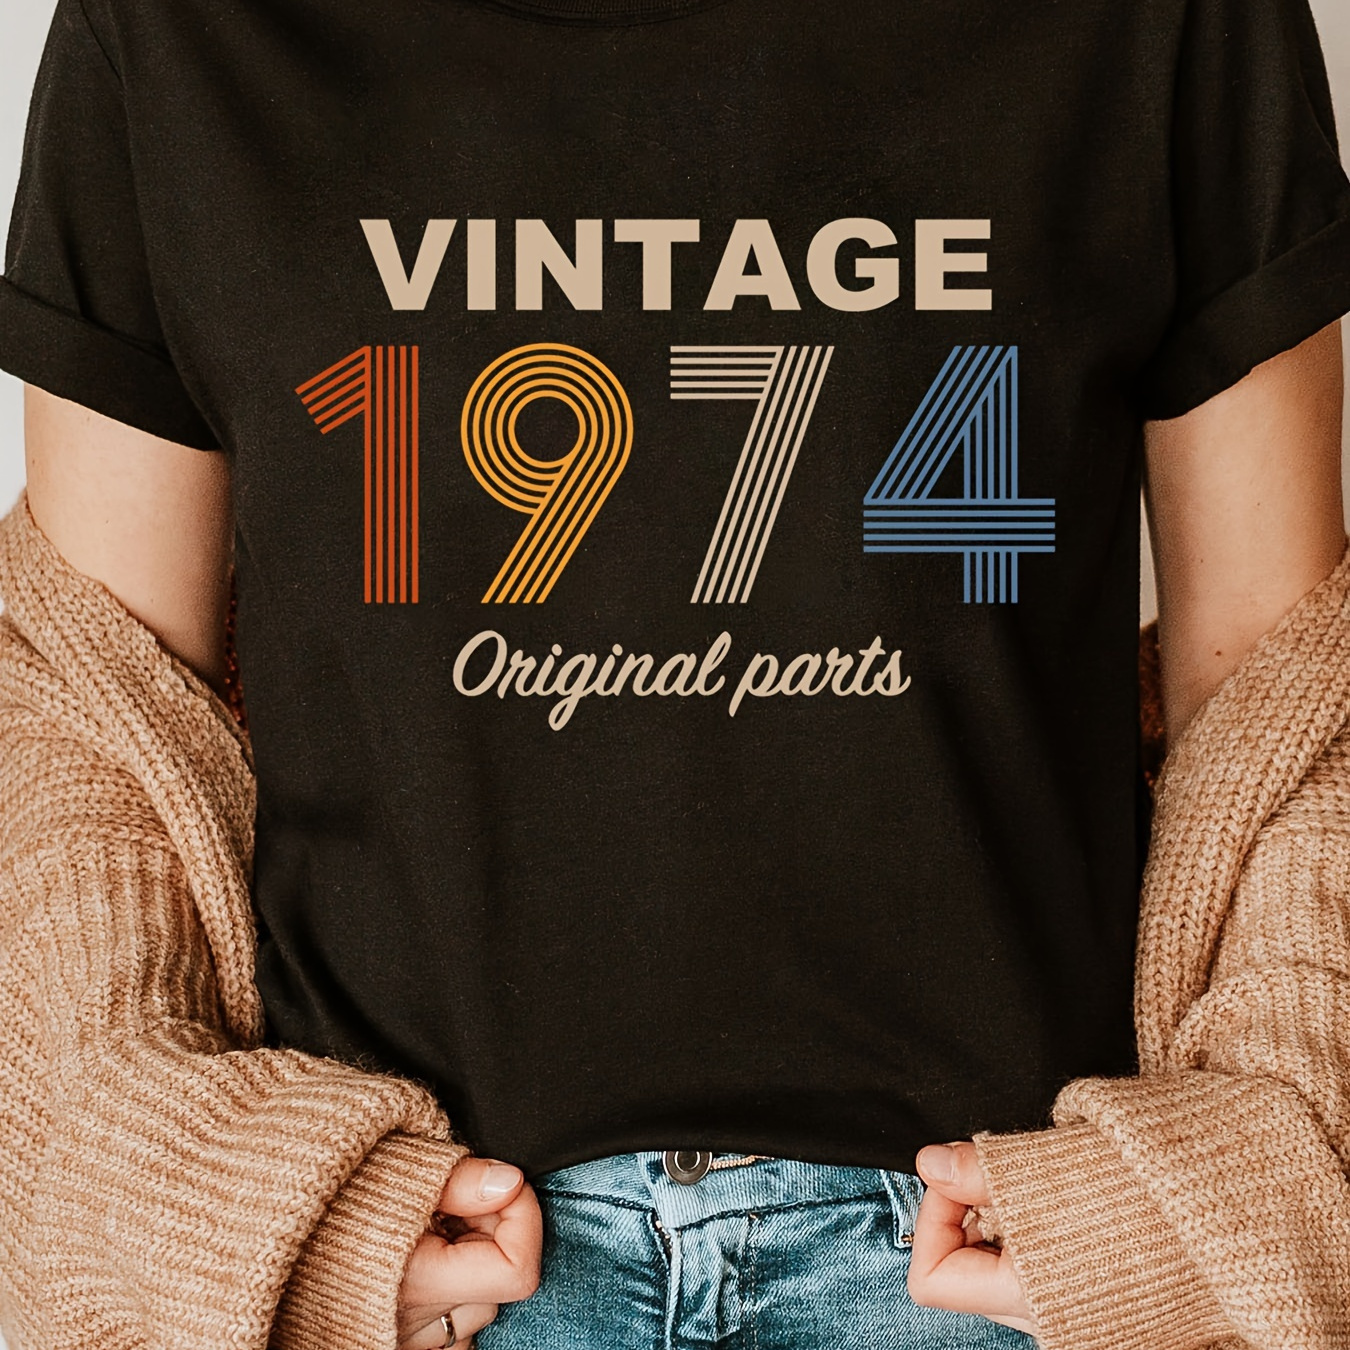 

Vintage 1974 Print Crew Neck T-shirt, Short Sleeve Casual Top For Summer & Spring, Women's Clothing